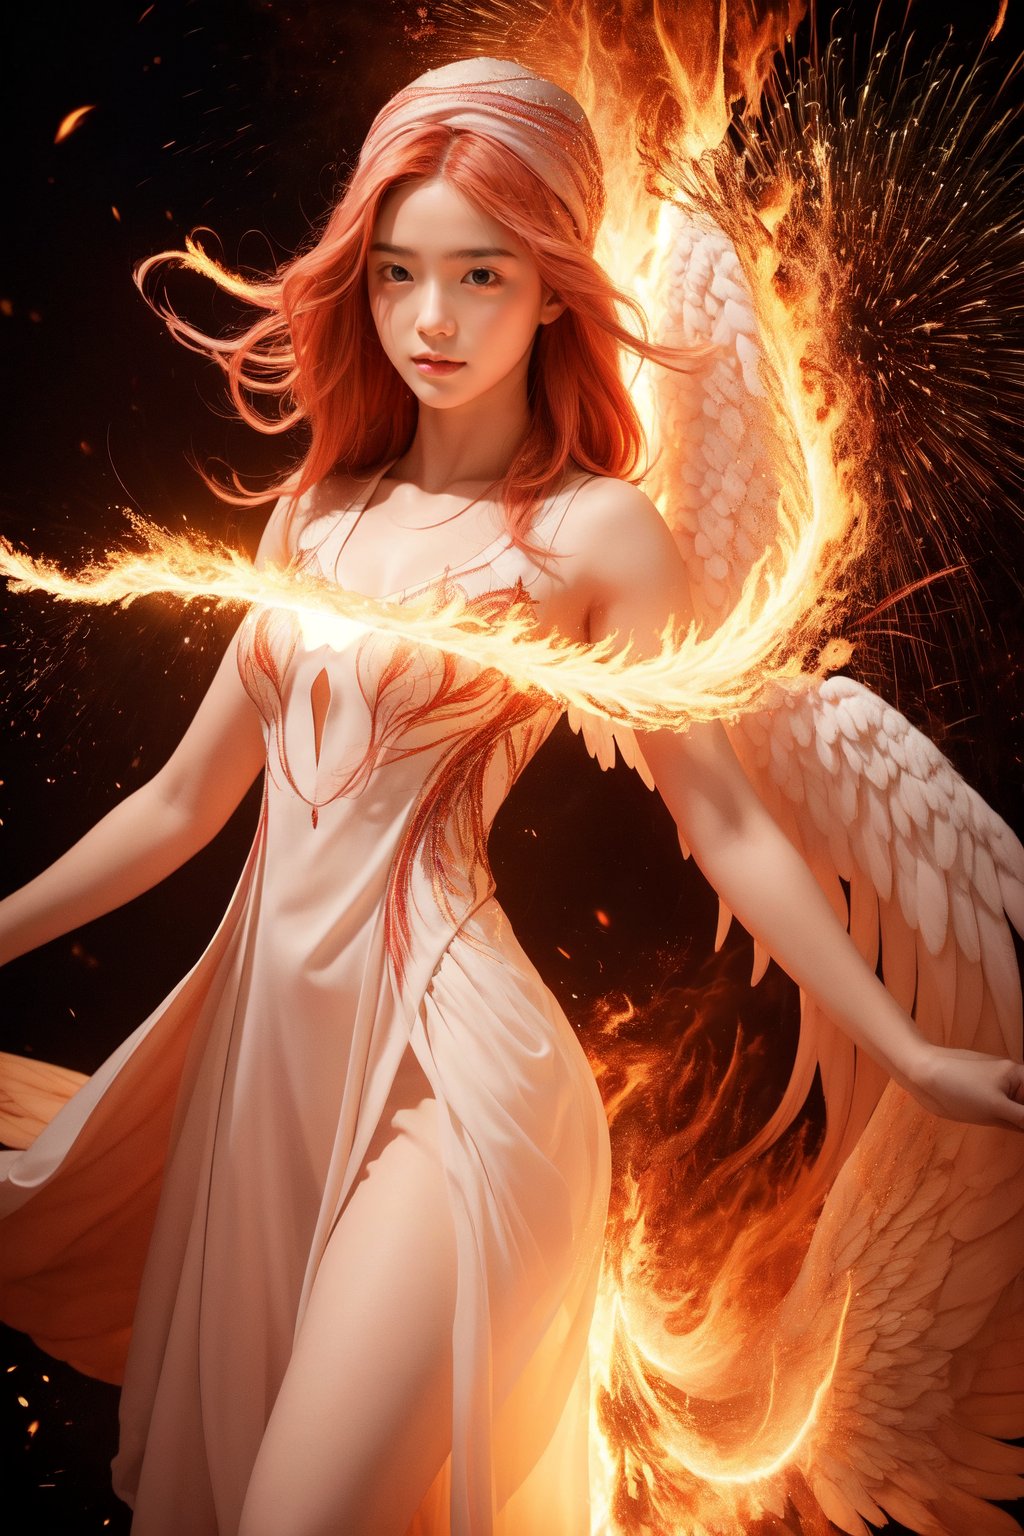 A breathtaking masterpiece depicts a lone girl, standing majestically amidst an intricate orange-red fractal background. Her flowing pink hair and bright red hat are illuminated by fiery sparks as she casts a fire spell. The camera captures her from the side, showcasing her striking blue-green eyes and delicate features as she leaps into the air, surrounded by swirling flames.,Angel wings